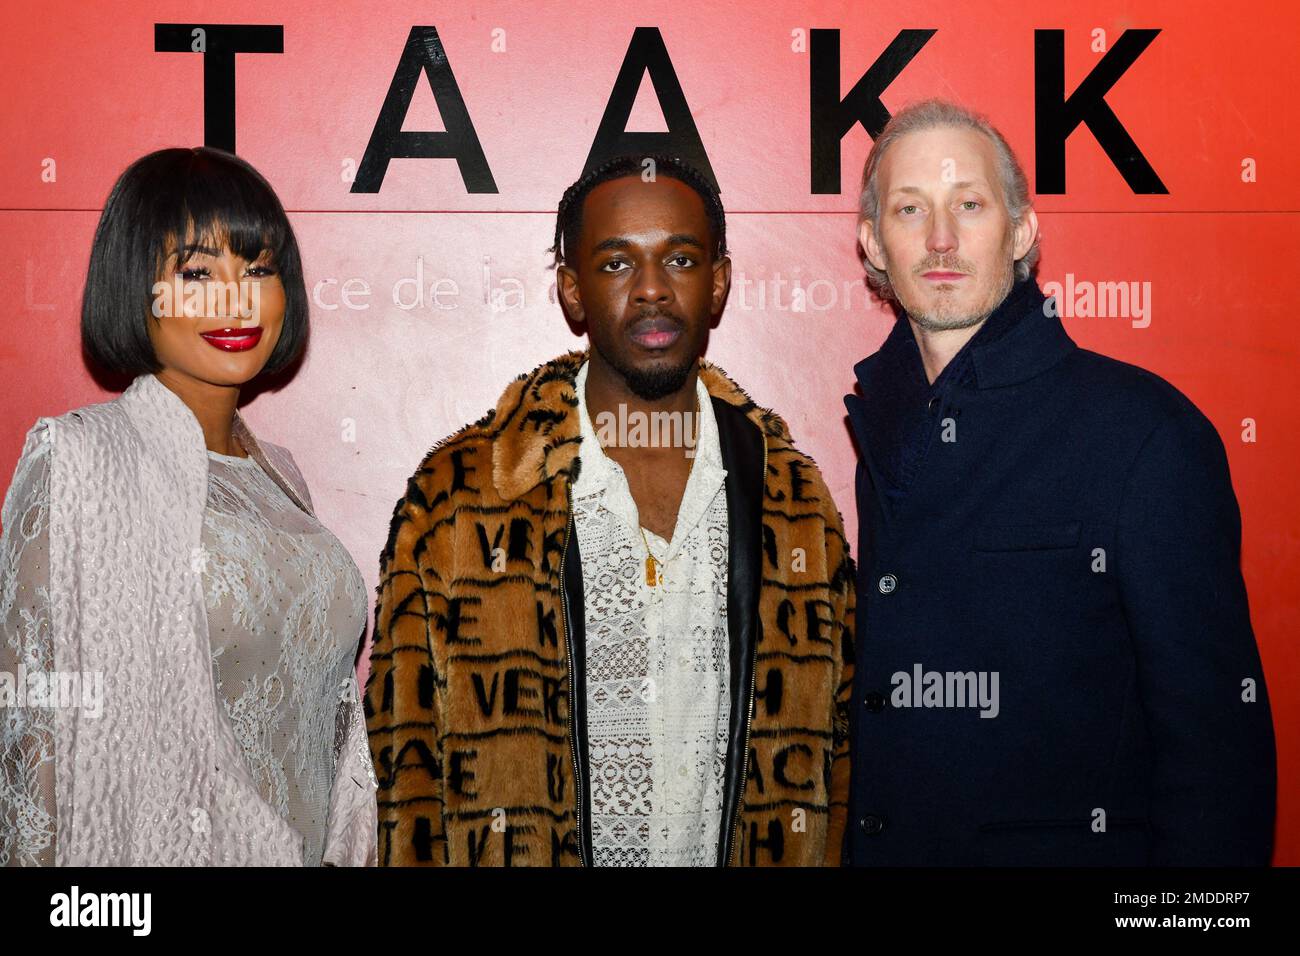 Miss Cote d'Ivoire 2005 and ex-wife of Ivorian international soccer player Zokora Didier Maestro, Brian Amont and Bruno Guery (Luc from Emily in Paris, Netflix series) (L-R) attend the TAAKK Paris Fashion Week - Menswear Fall-Winter 2023 show as part of Paris Fashion Week on January 22, 2023 in Paris, France. Photo by Jana Call me J/ABACAPRESS.COM Stock Photo